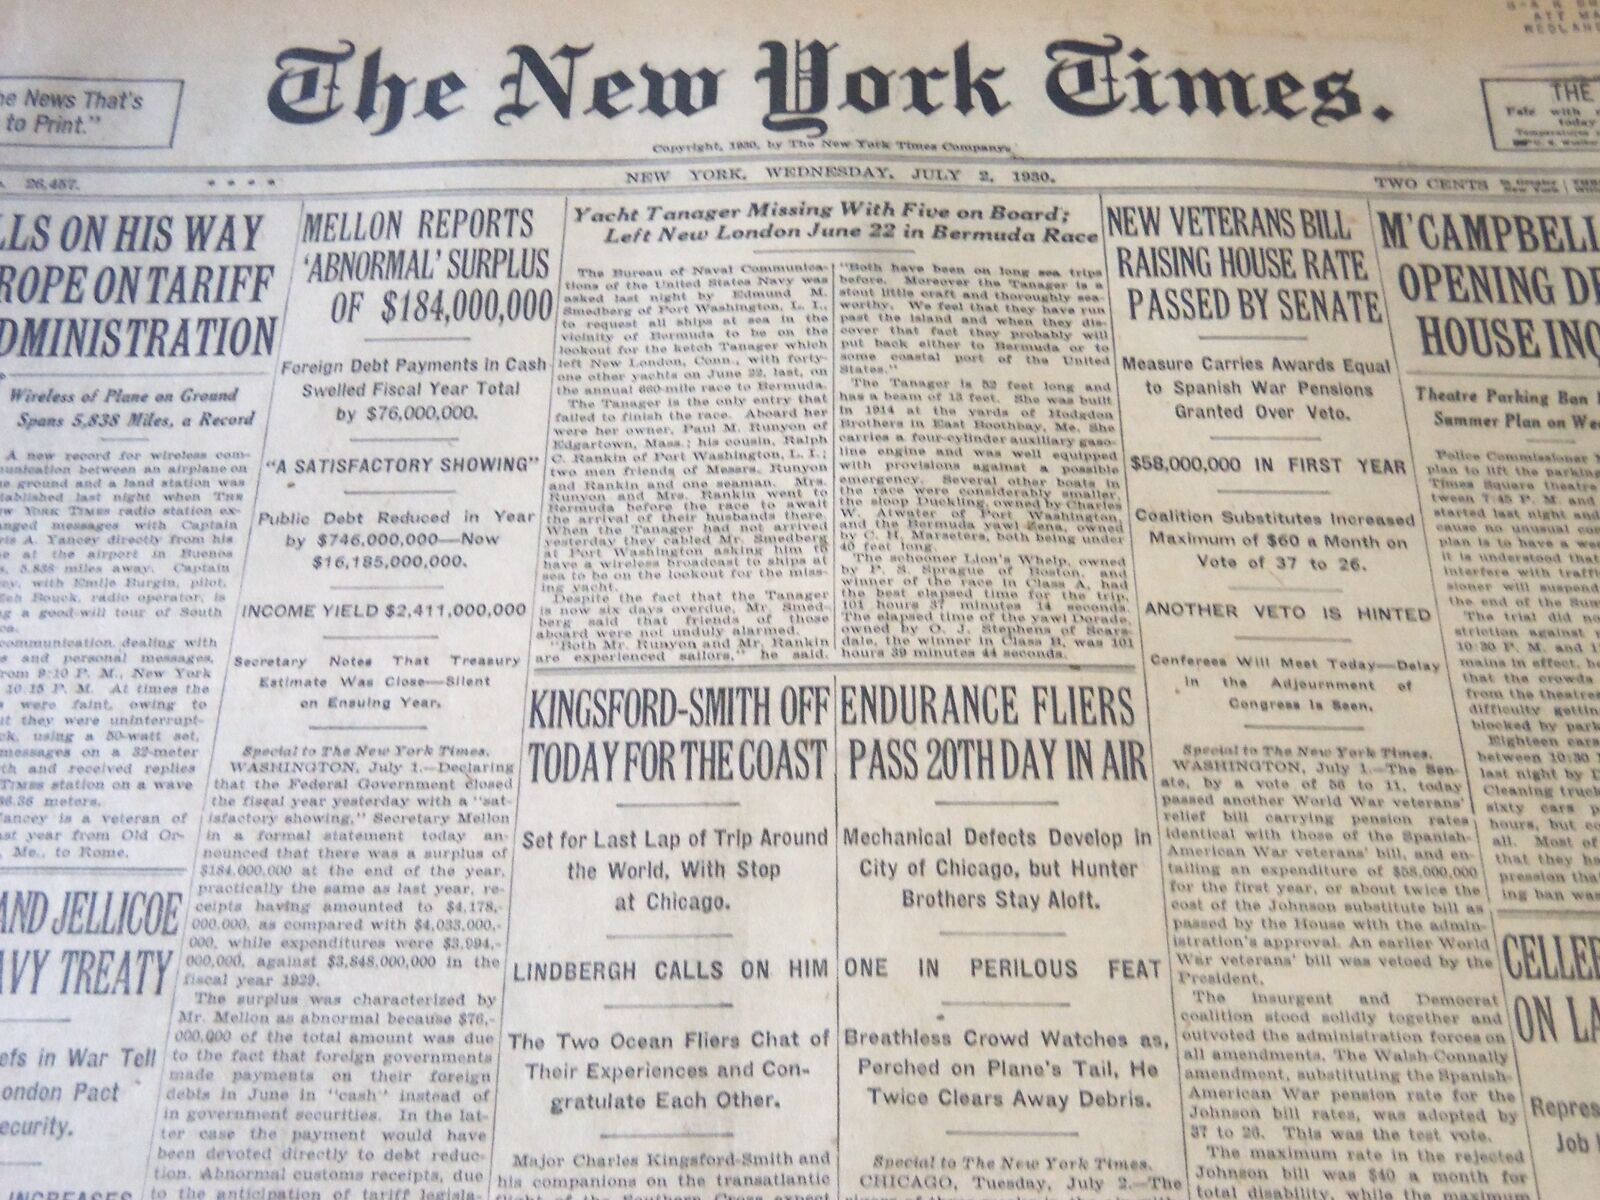 1930 JULY 2 NEW YORK TIMES - HUNTER BROTHERS PASS 20TH DAY IN AIR - NT 6343